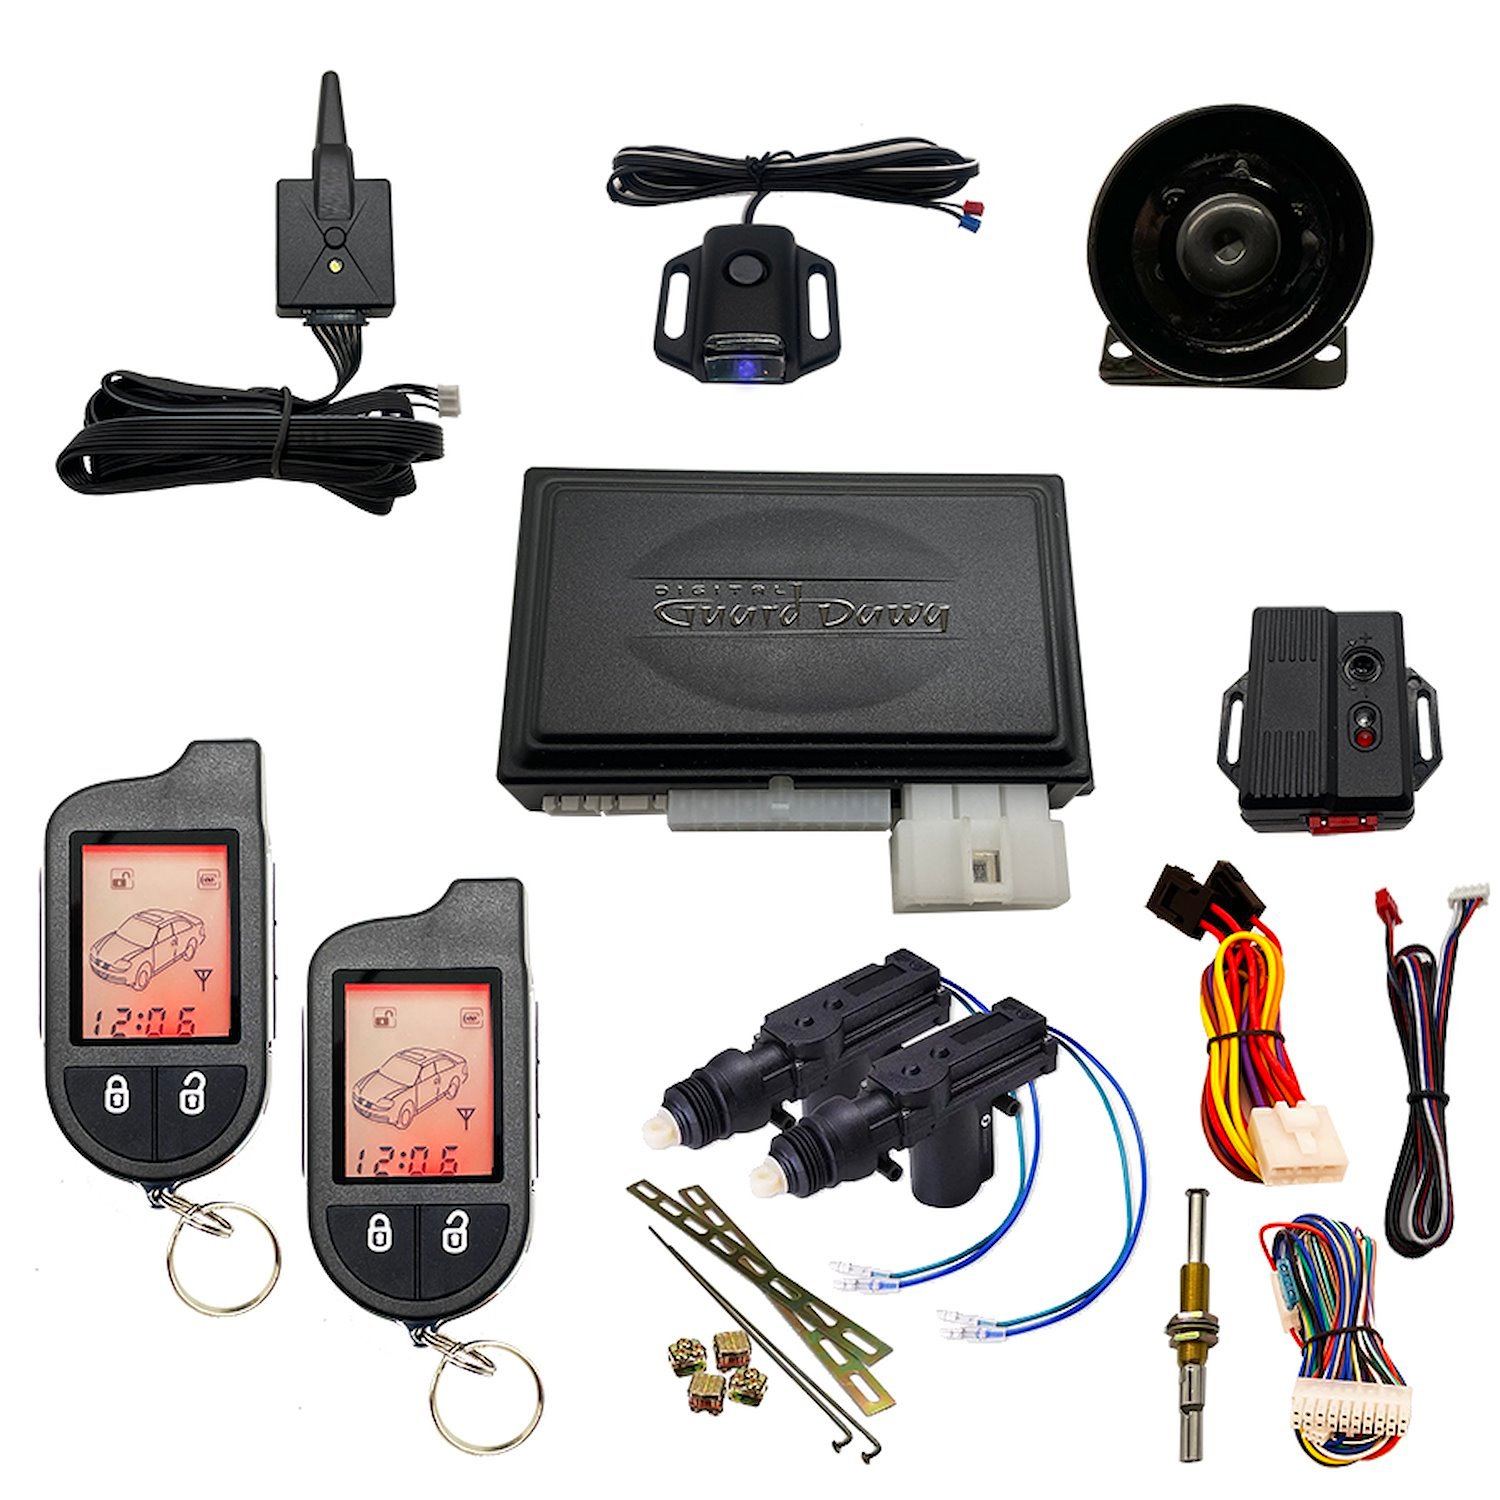 DGD-KY-ALM-RS2-2A Keyless Entry, Alarm System, and Remote Start, 2-Way w/2-Door Actuator Kit